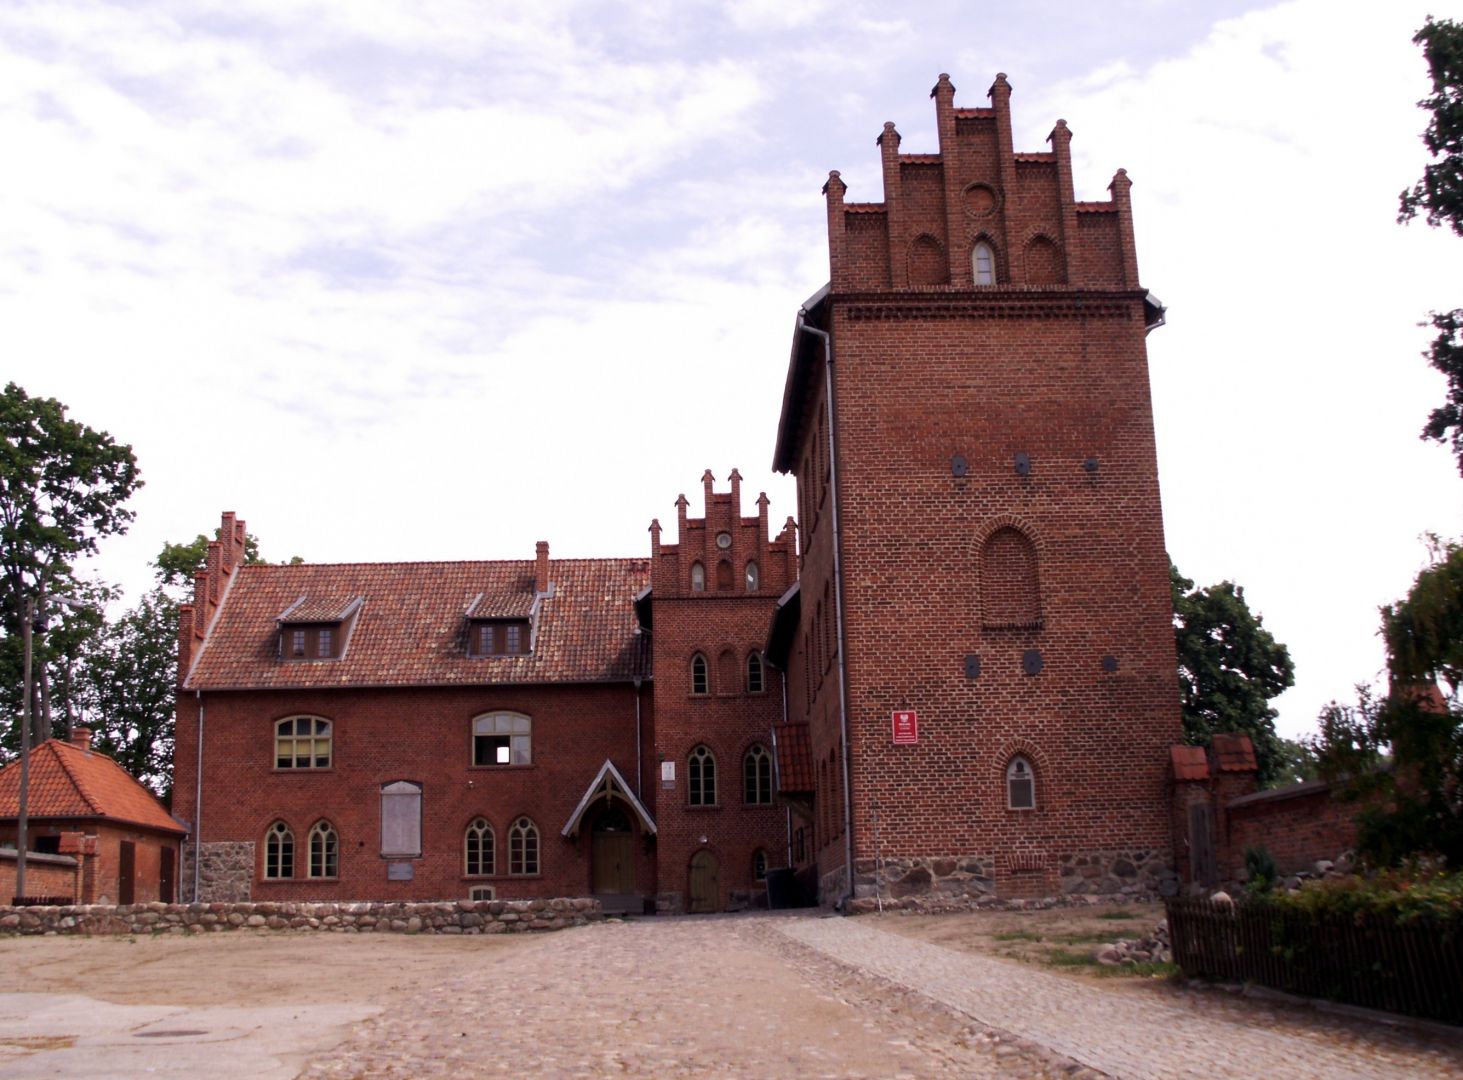 The building of the Teutonic castle